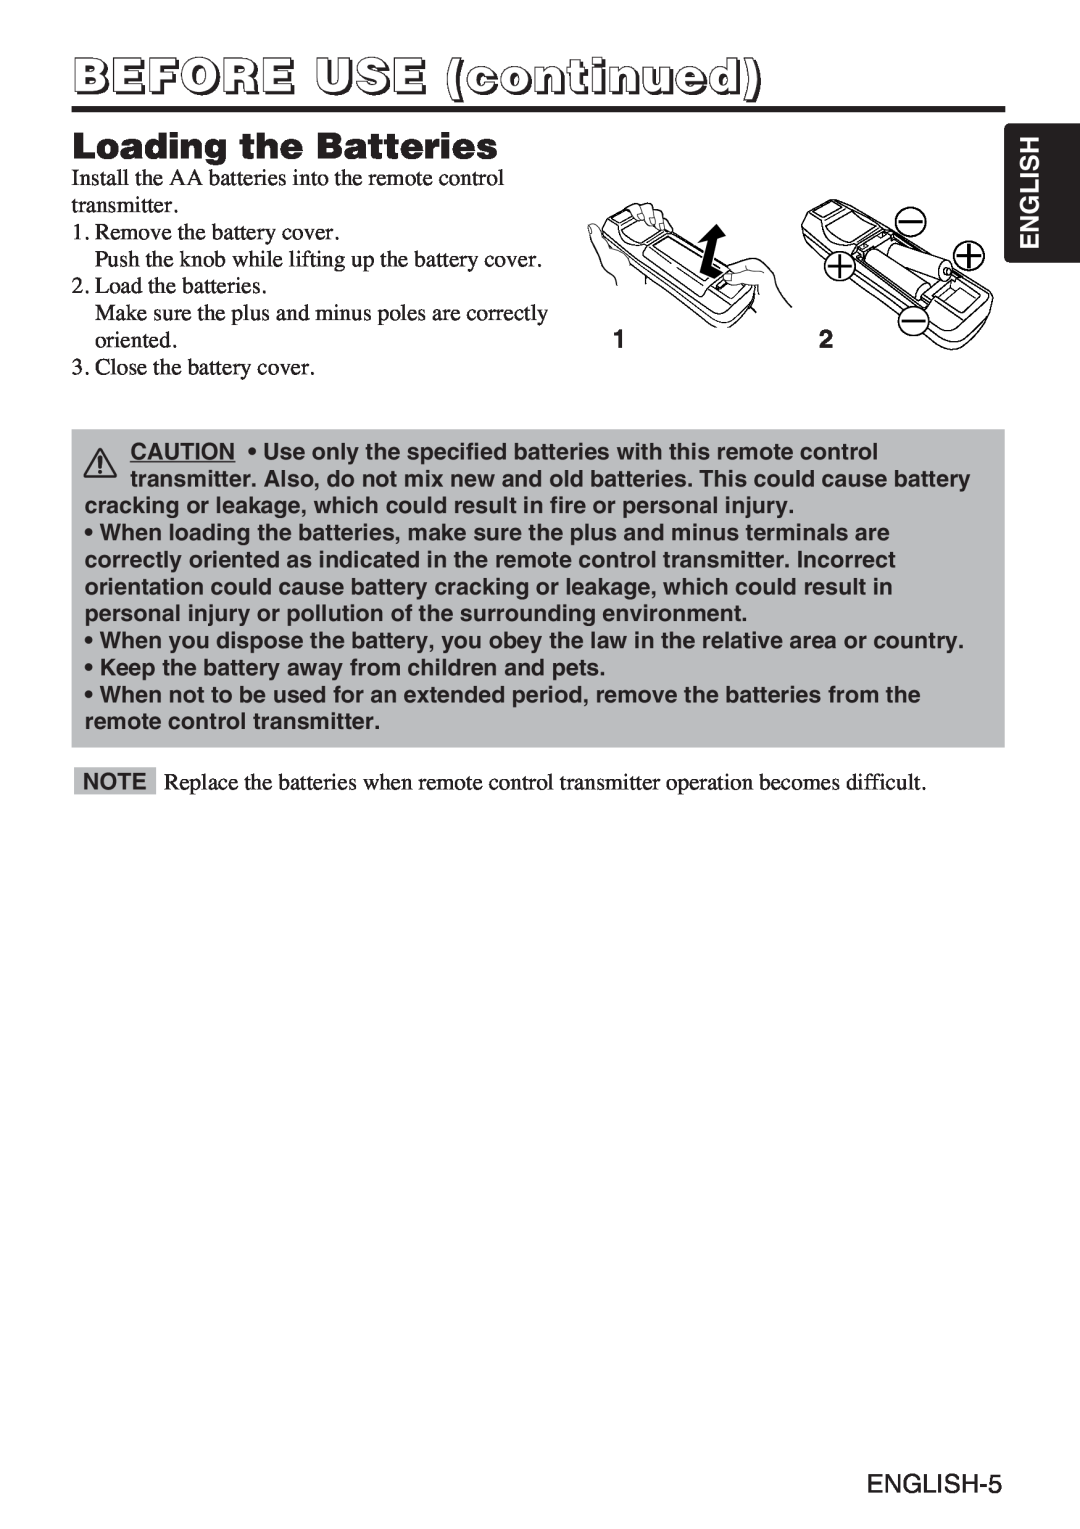 InFocus liquid crystal user manual Loading the Batteries, ENGLISH-5, BEFORE USE continued, English 